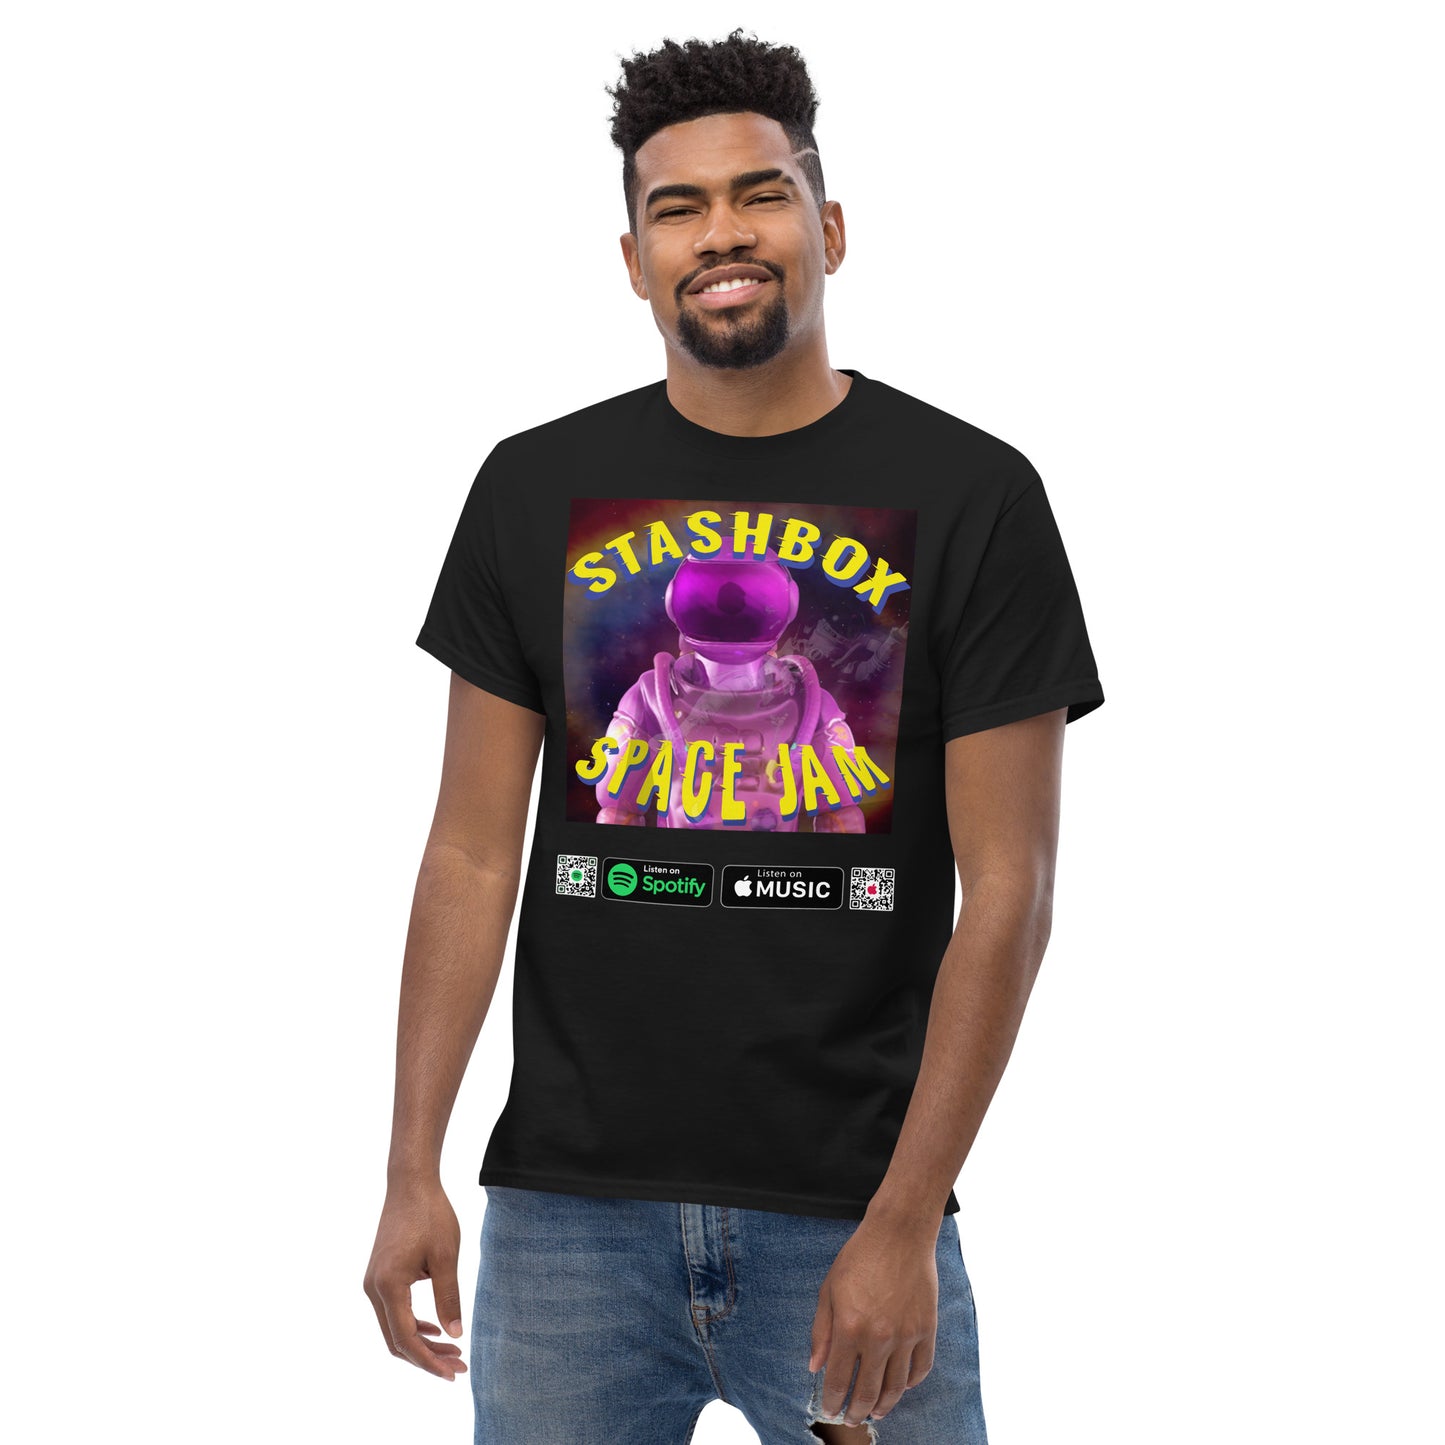 Space Jam: Explore the Cosmos in Style with Stashbox Men's Classic Tee Shirt, Artwork #005. Embark on a galactic journey with this unique tee, perfect for space enthusiasts and trendsetters. #StashboxGalaxy #SpaceExplorationFashion #CosmicStyle